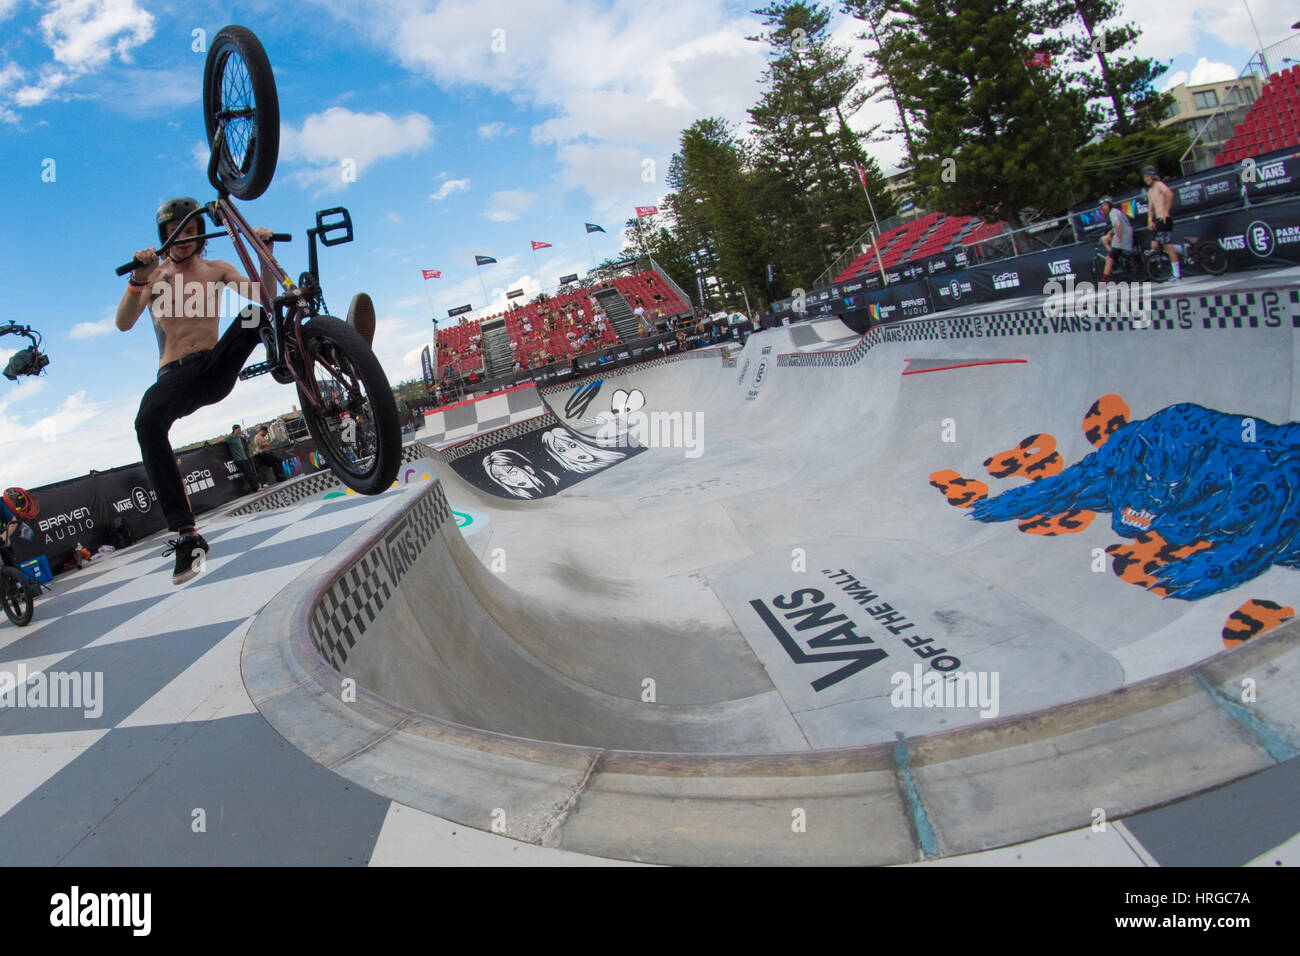 Sydney, Australia - 2nd March 2017: Australian Open of Surfing Sports Event at Manly Beach, Australia featuring Surfing, BMX, Skating and Music.  Pictured are  athletes preparing / practing ahead of the Vans Pro Park Series BMX / Skate competion which is set to take place during the Australian Open of Surfing. Credit: mjmediabox/Alamy Live News Stock Photo